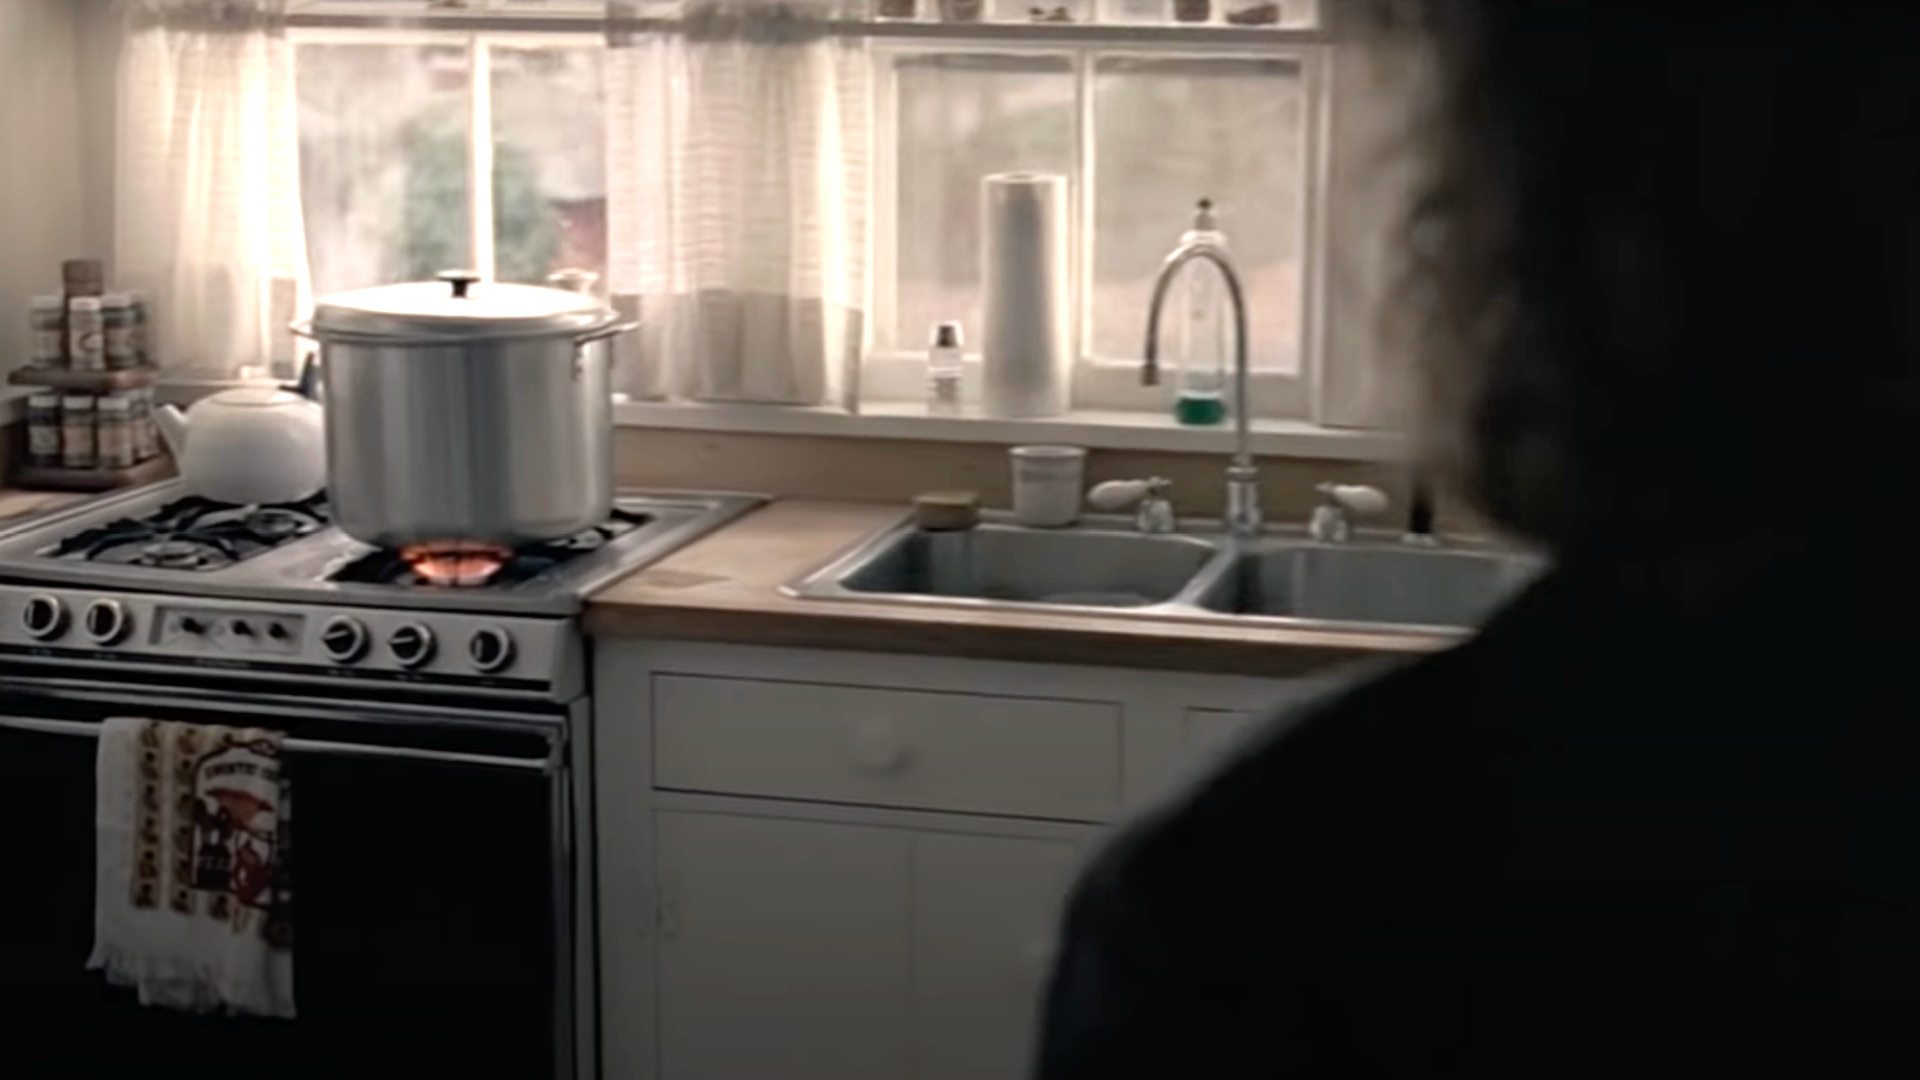 FATAL ATTRACTION film still of a woman facing a kitchen stove and sink